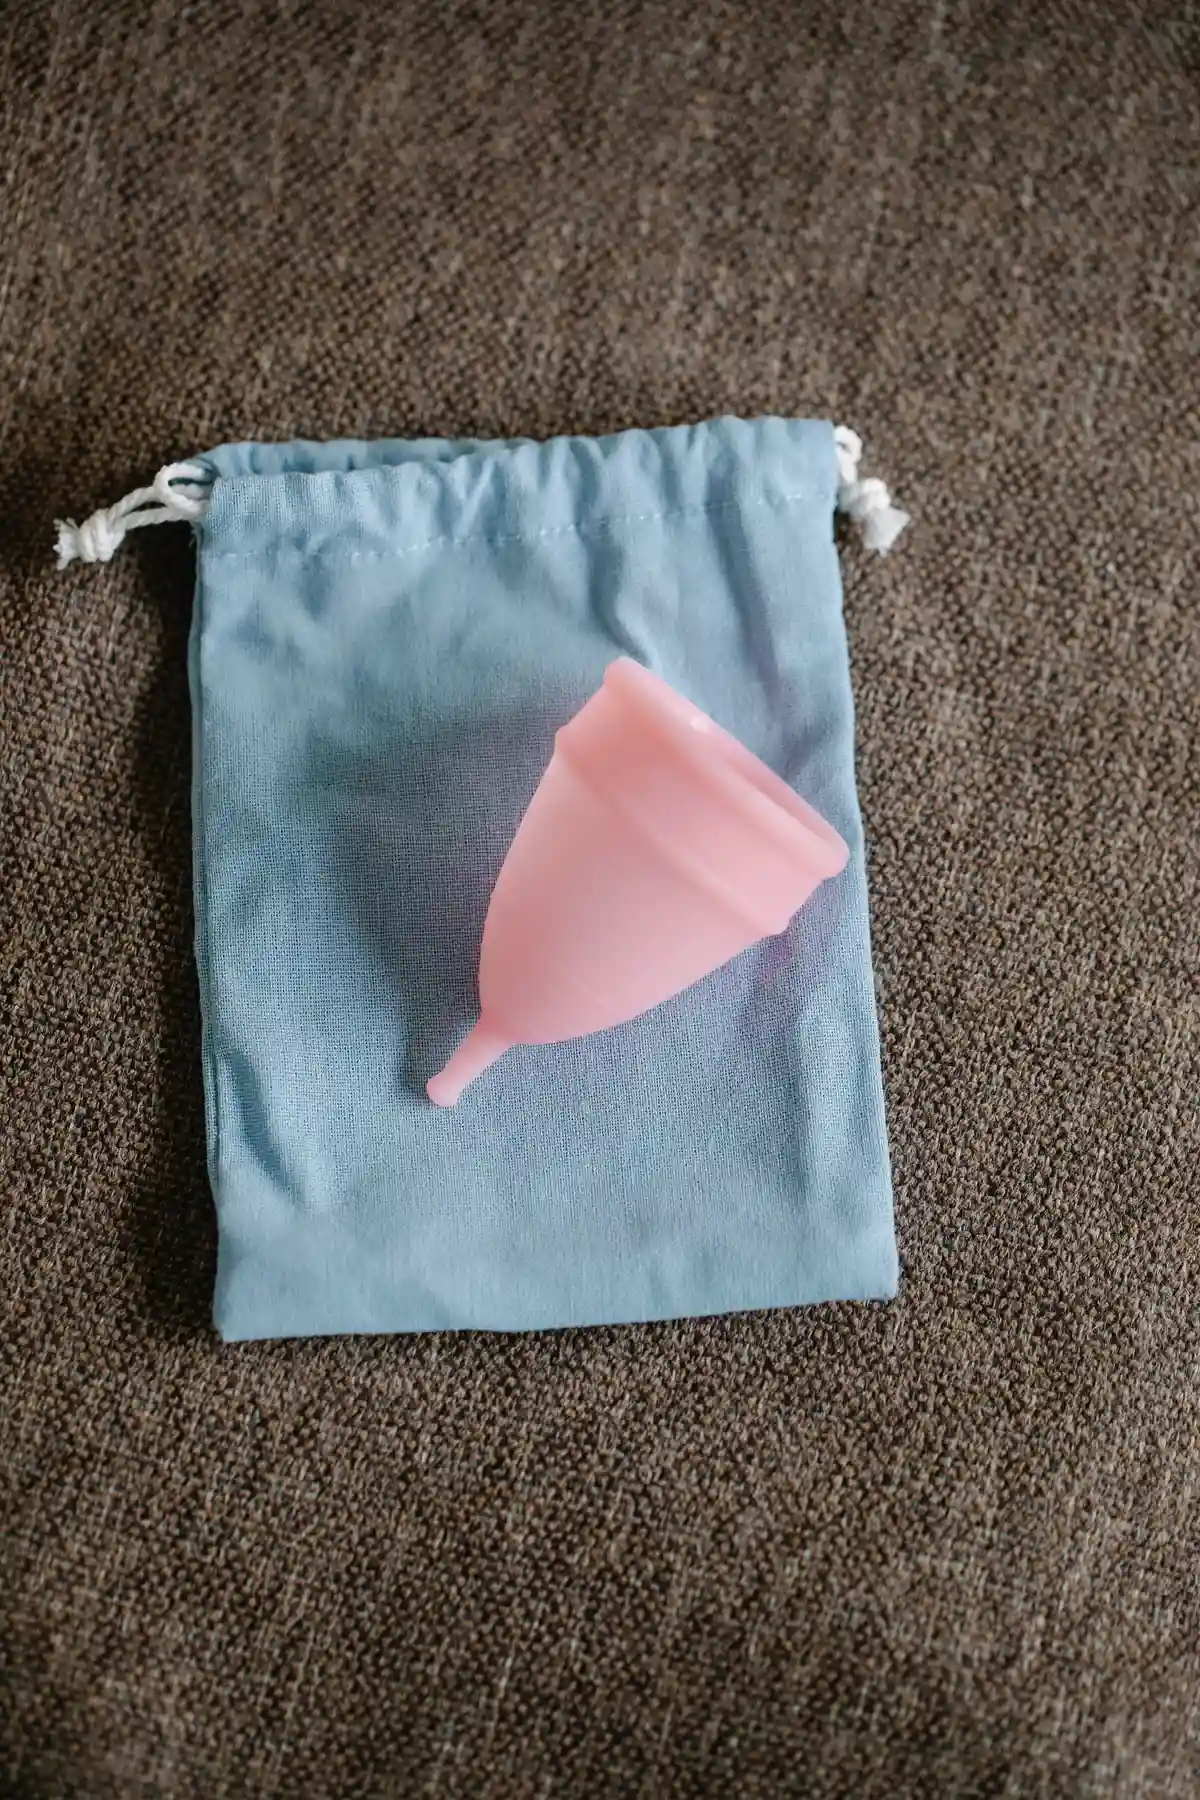 cleaning and sterilizing menstrual cup between uses